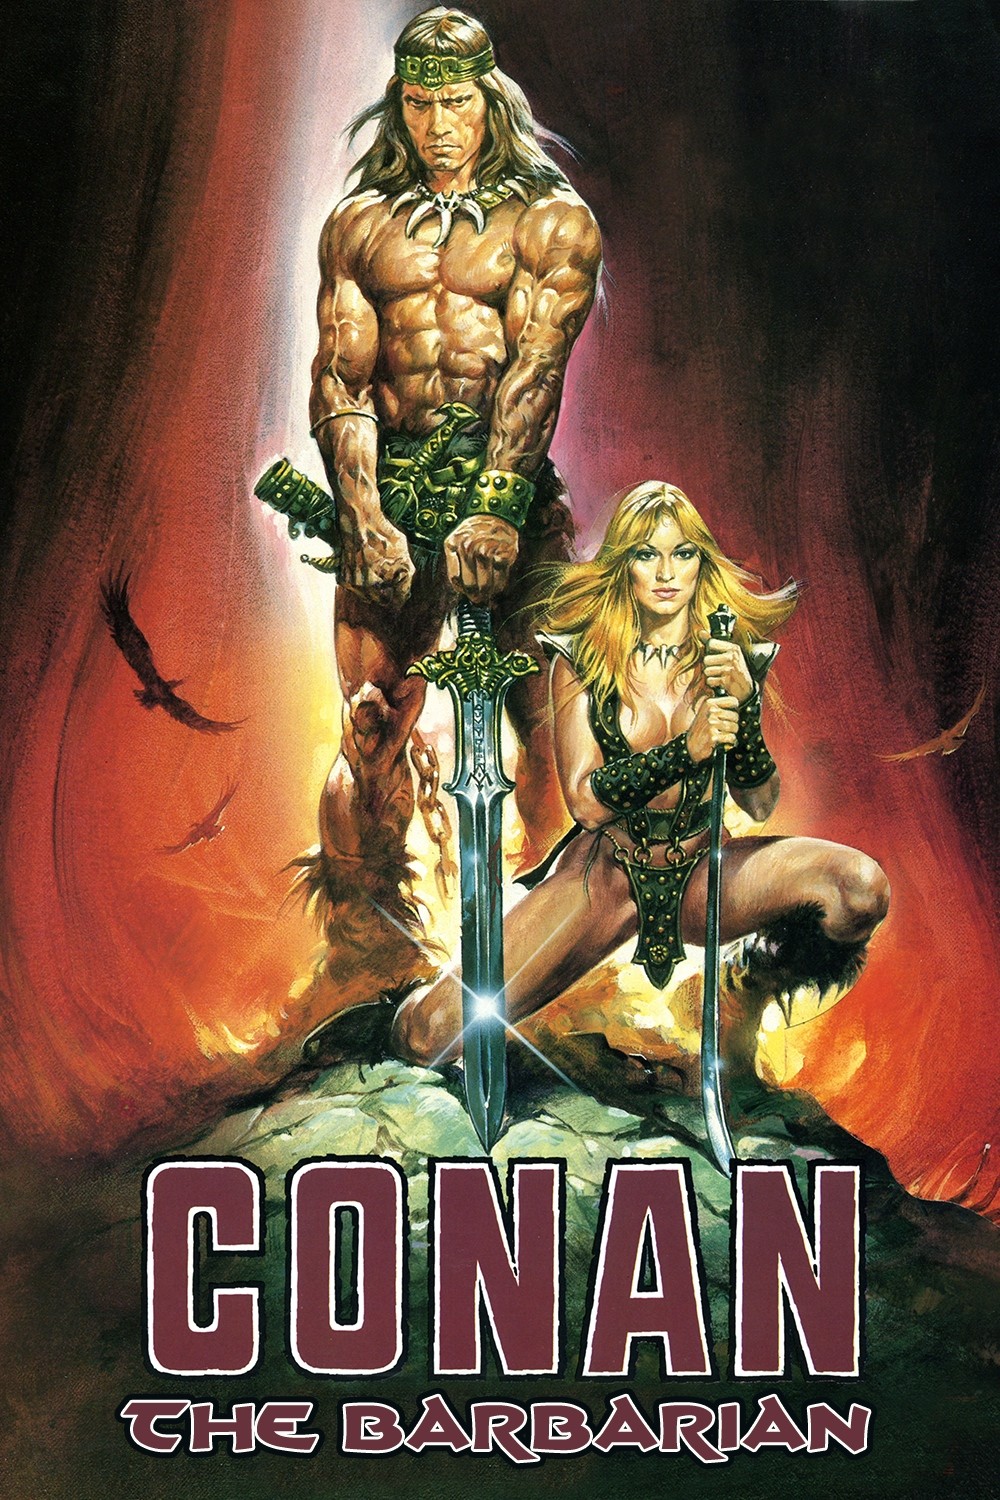 Amazing Conan The Barbarian (1982) Pictures & Backgrounds